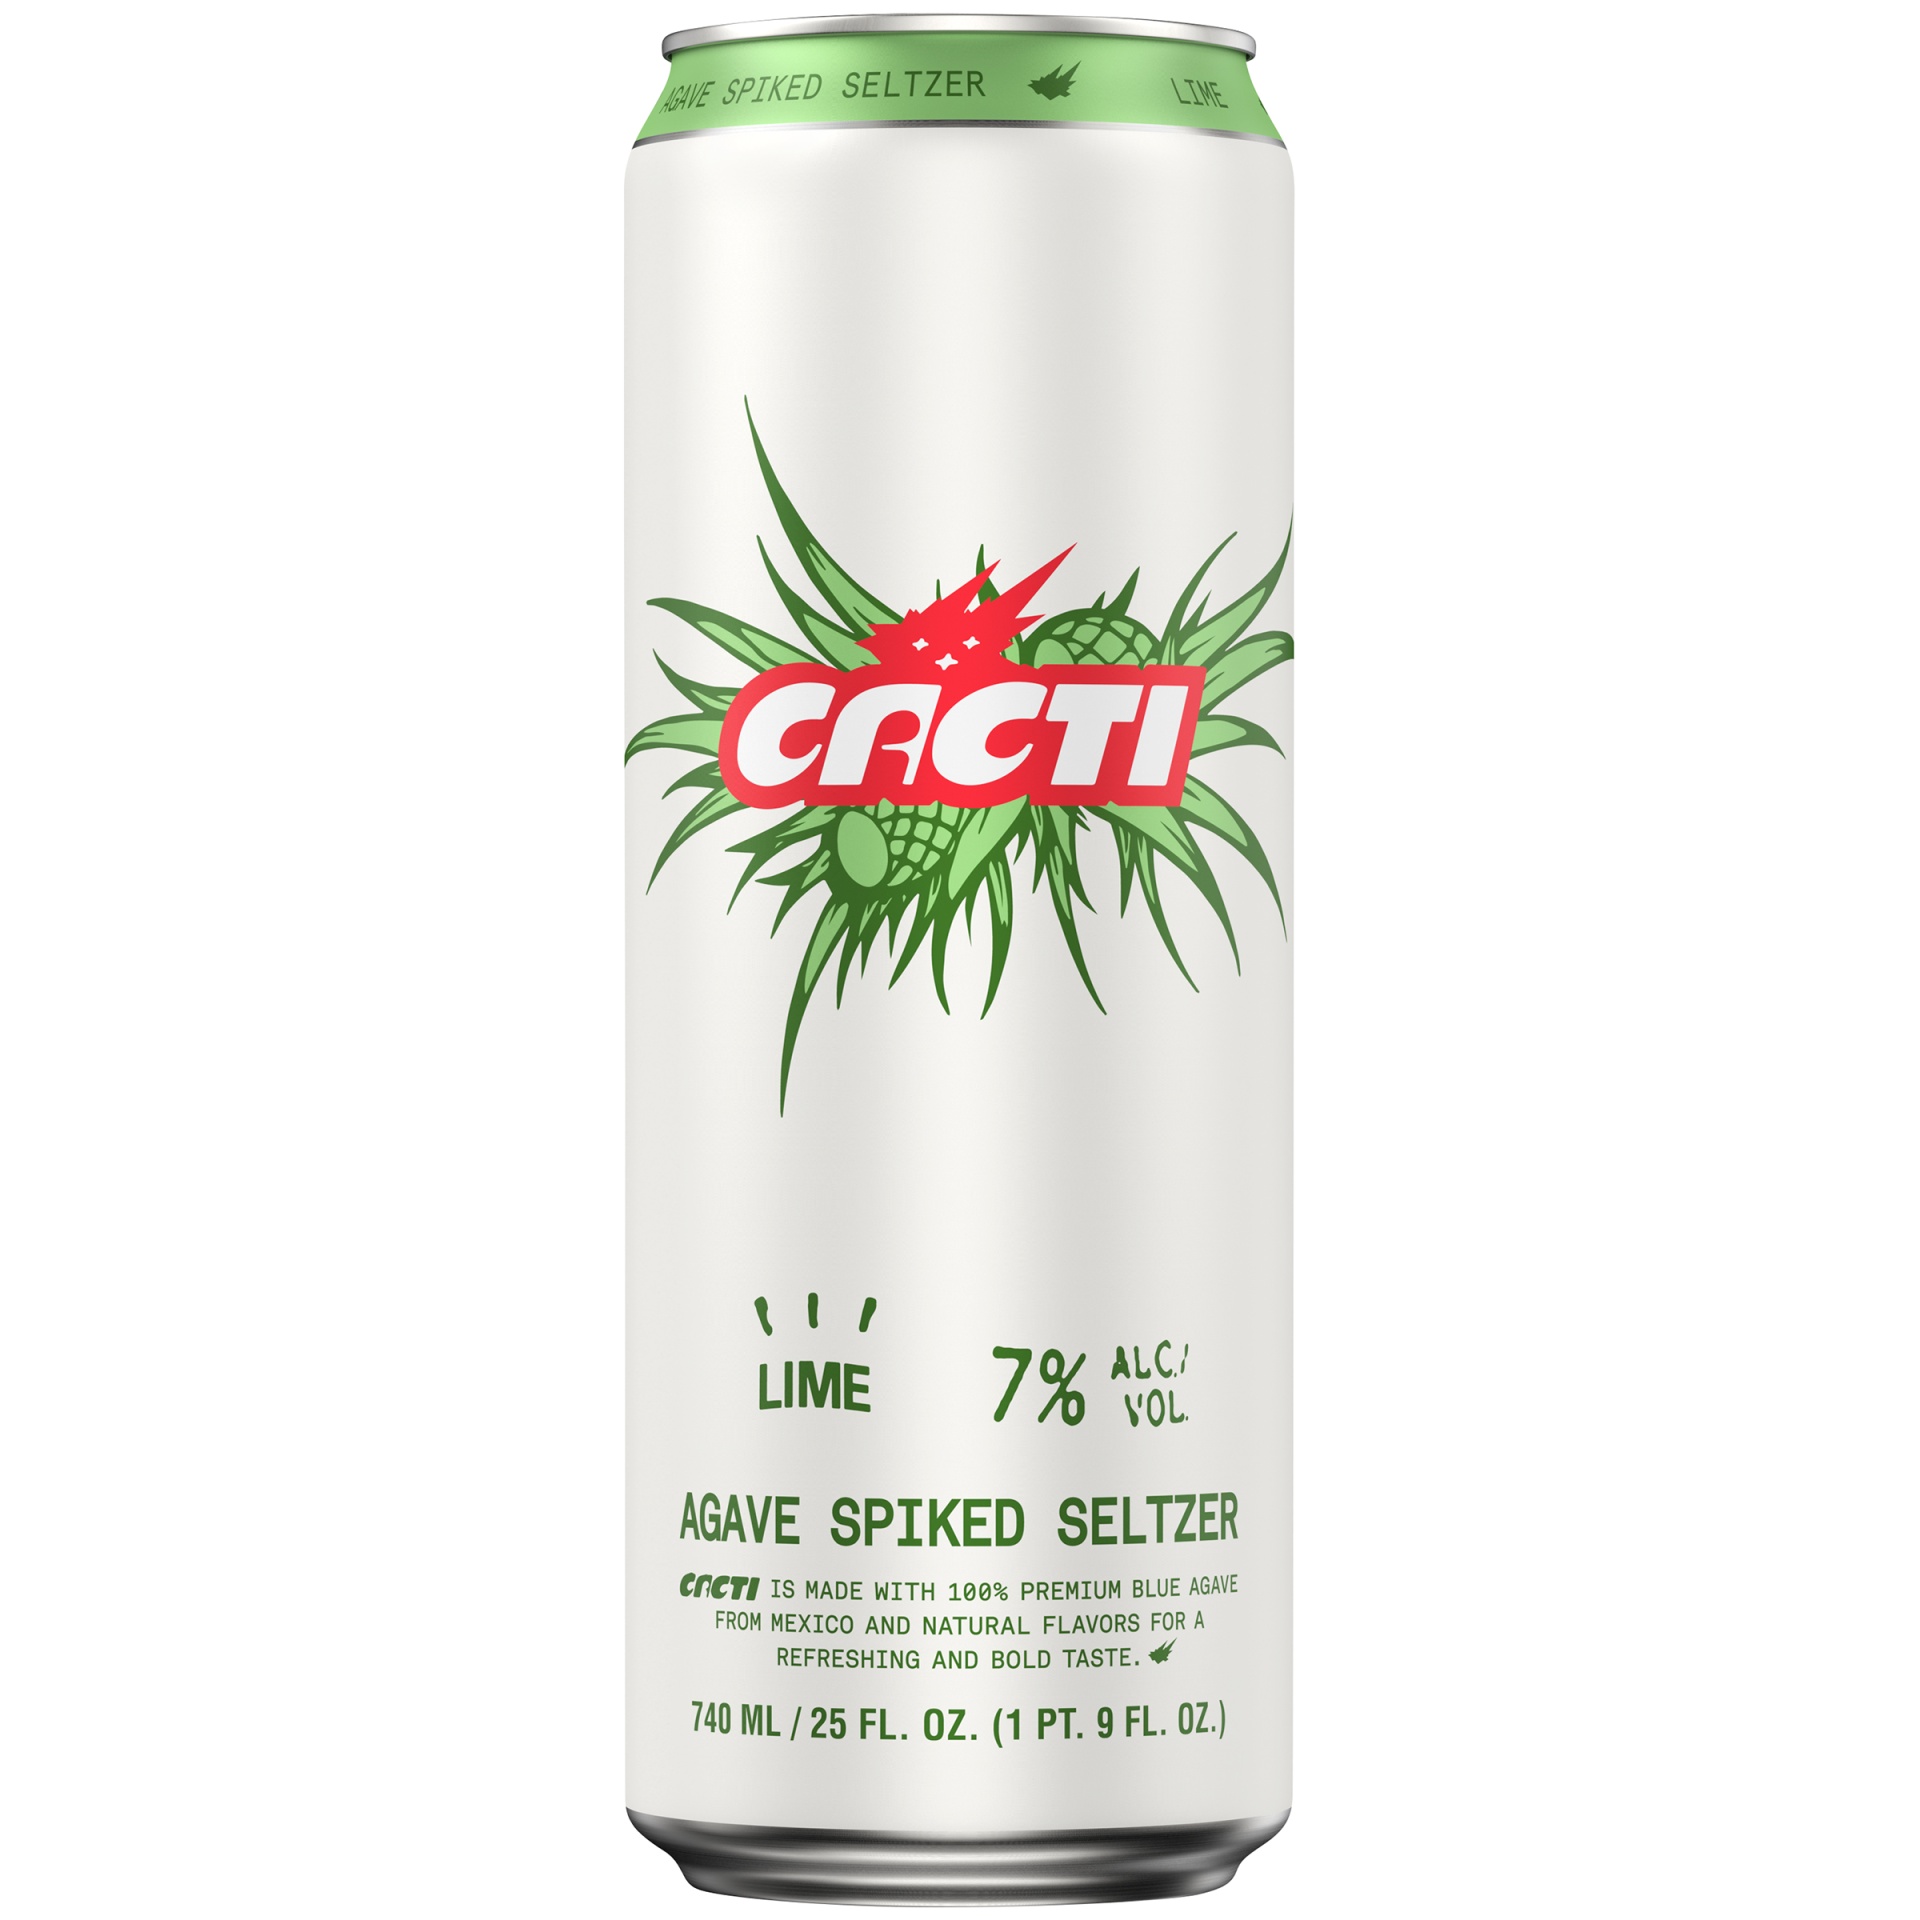 slide 1 of 1, CACTI Agave Spiked Seltzer CACTI Lime Agave Spiked Seltzer, 25 oz